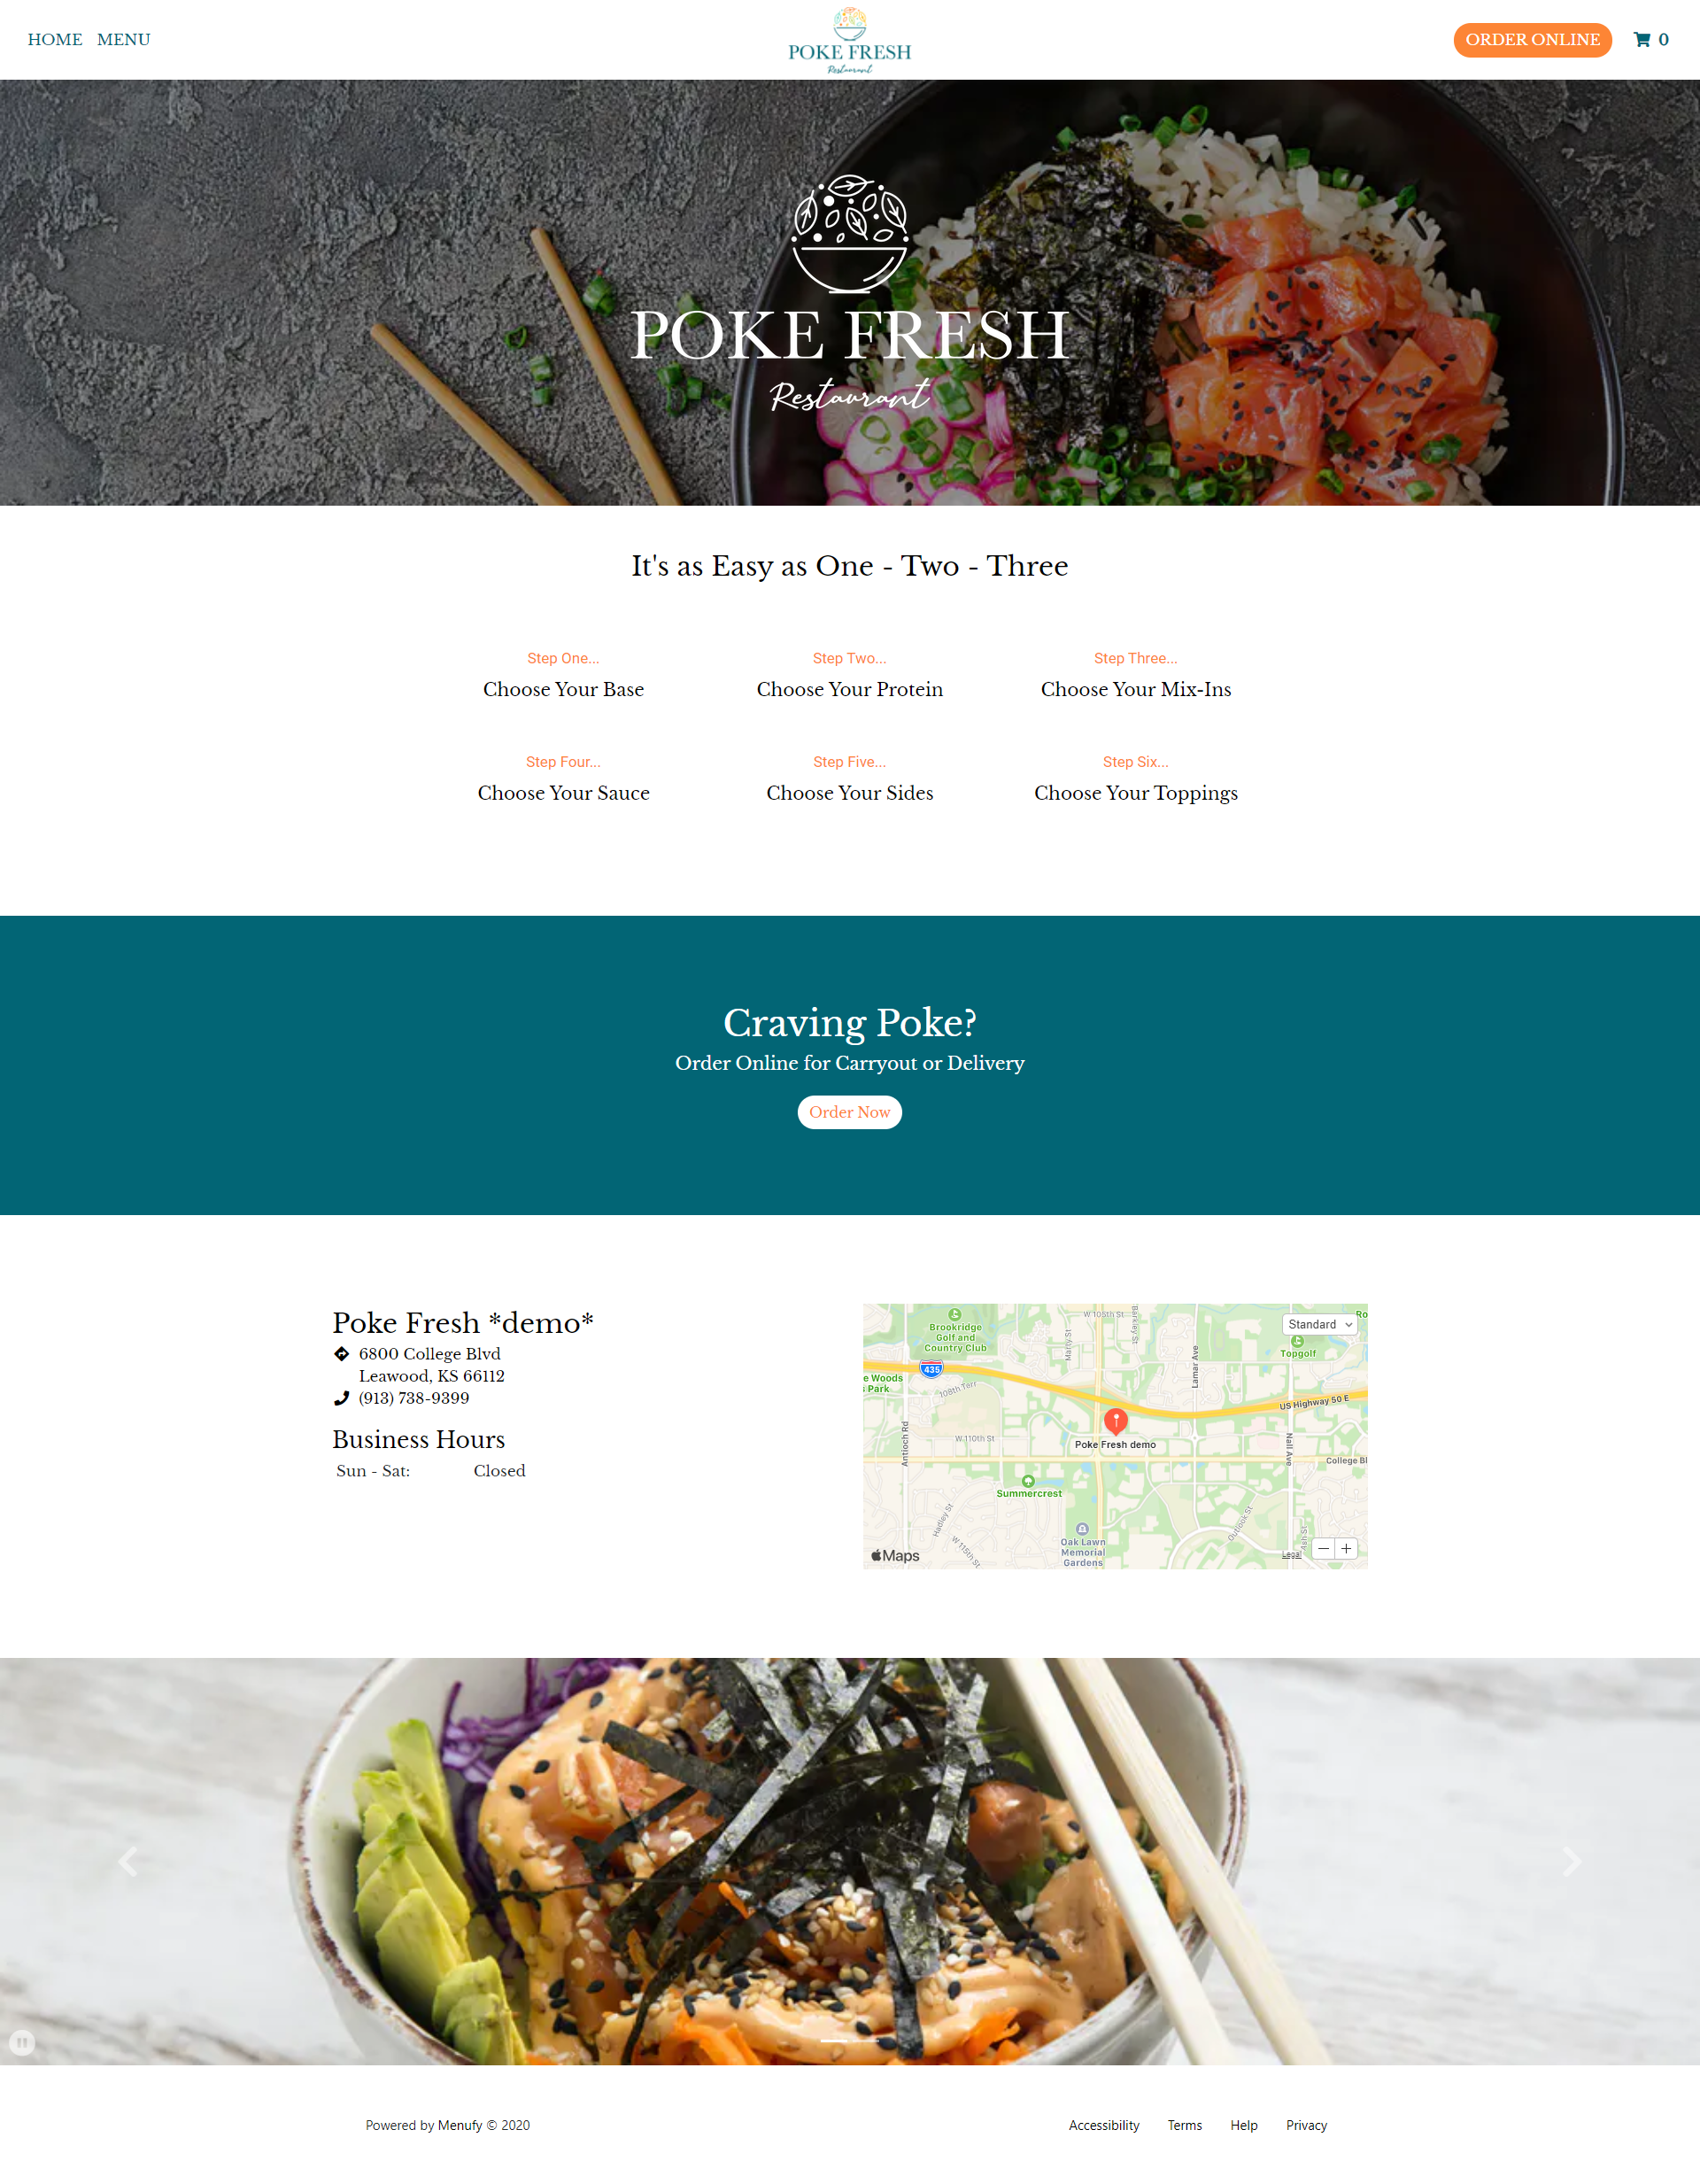 Example Poke Take-Out Restaurant Website